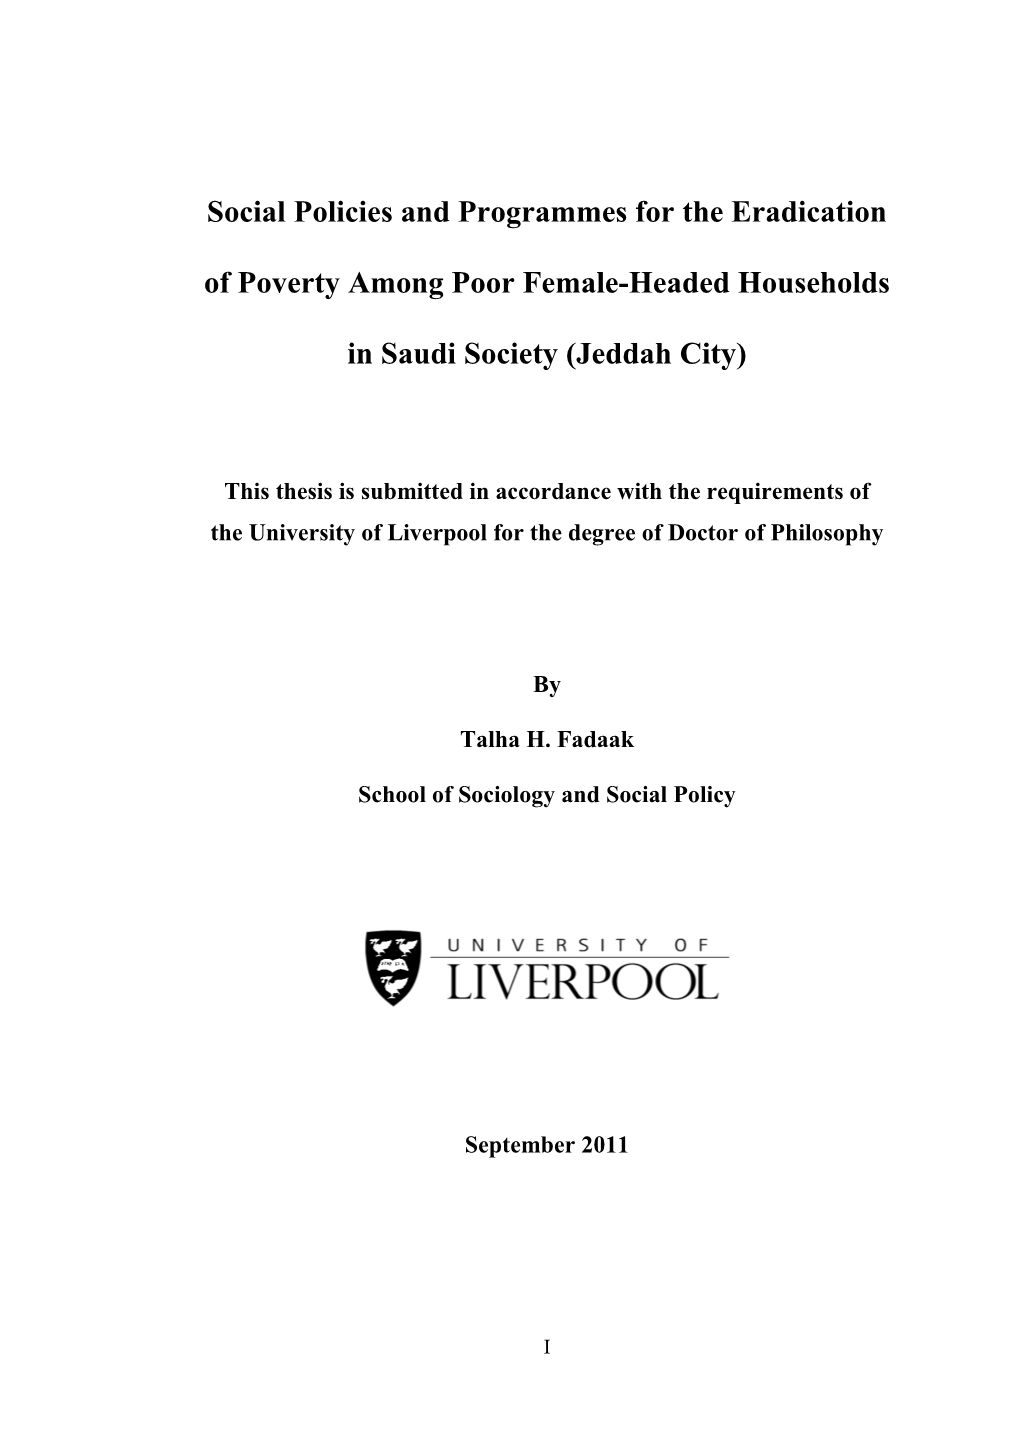 Social Policies and Programmes for the Eradication of Poverty Among Poor Female-Headed Households